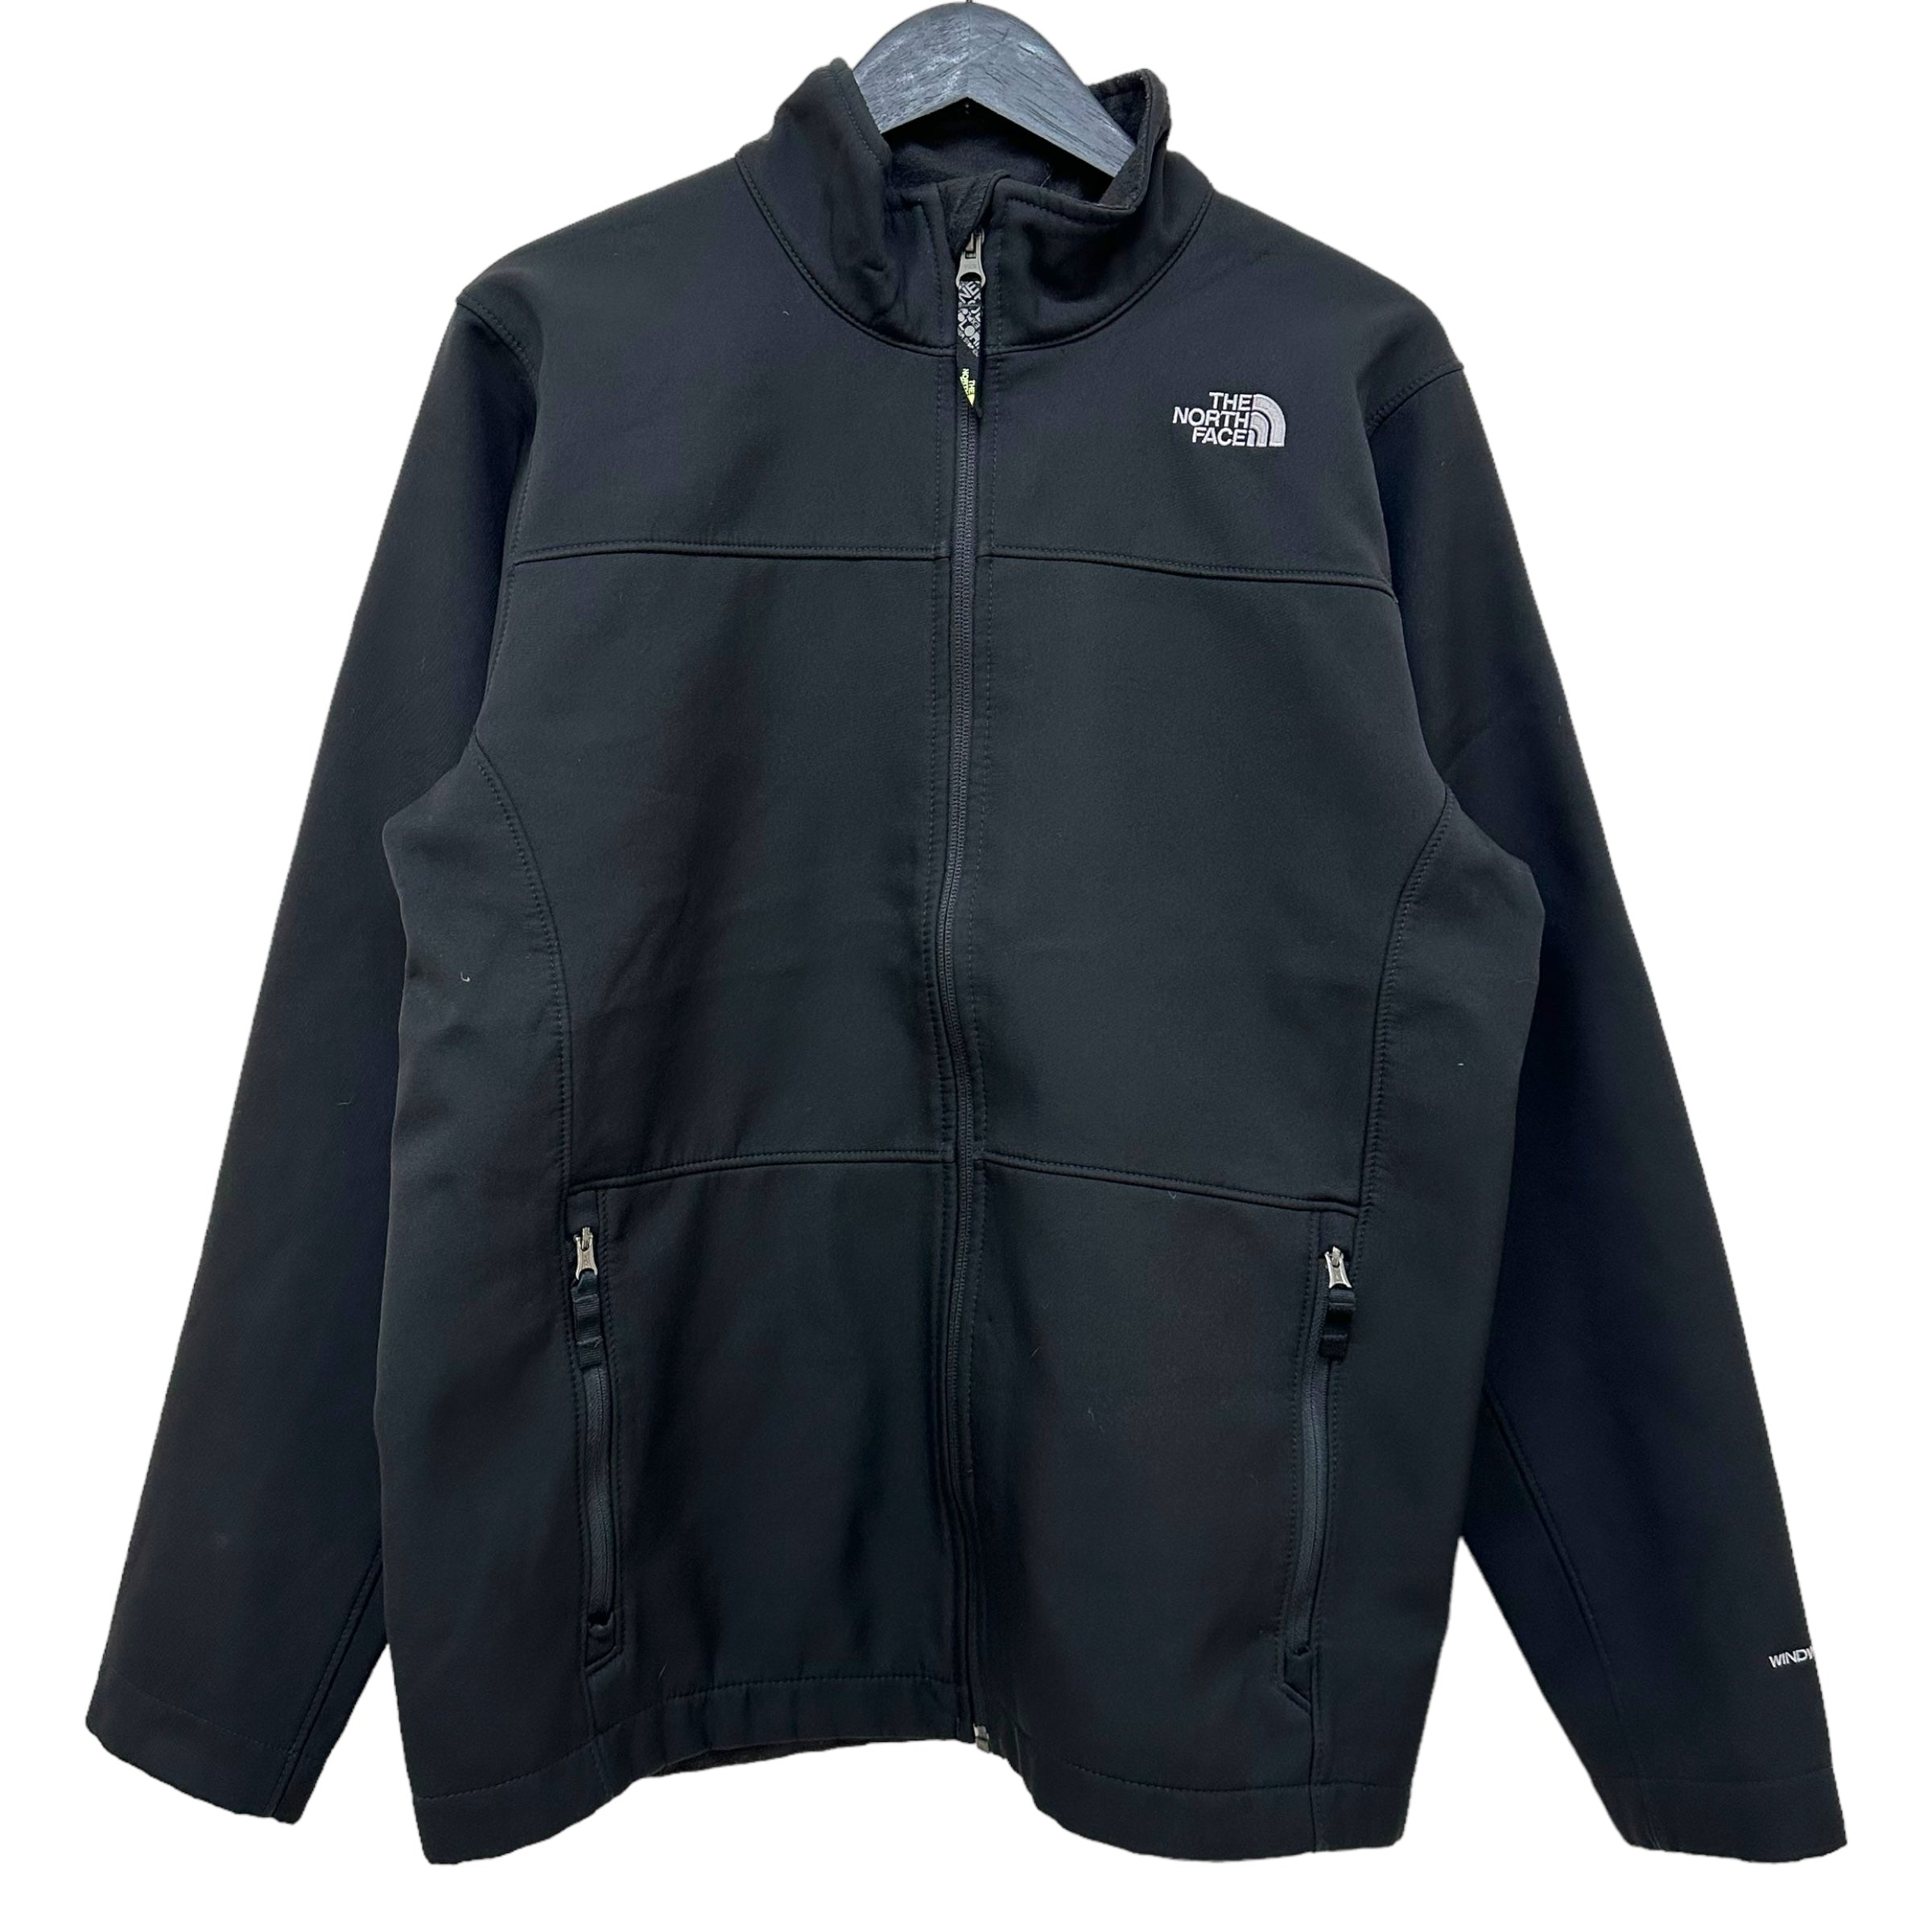 THE NORTH FACE – GRIZZLY ONLINE